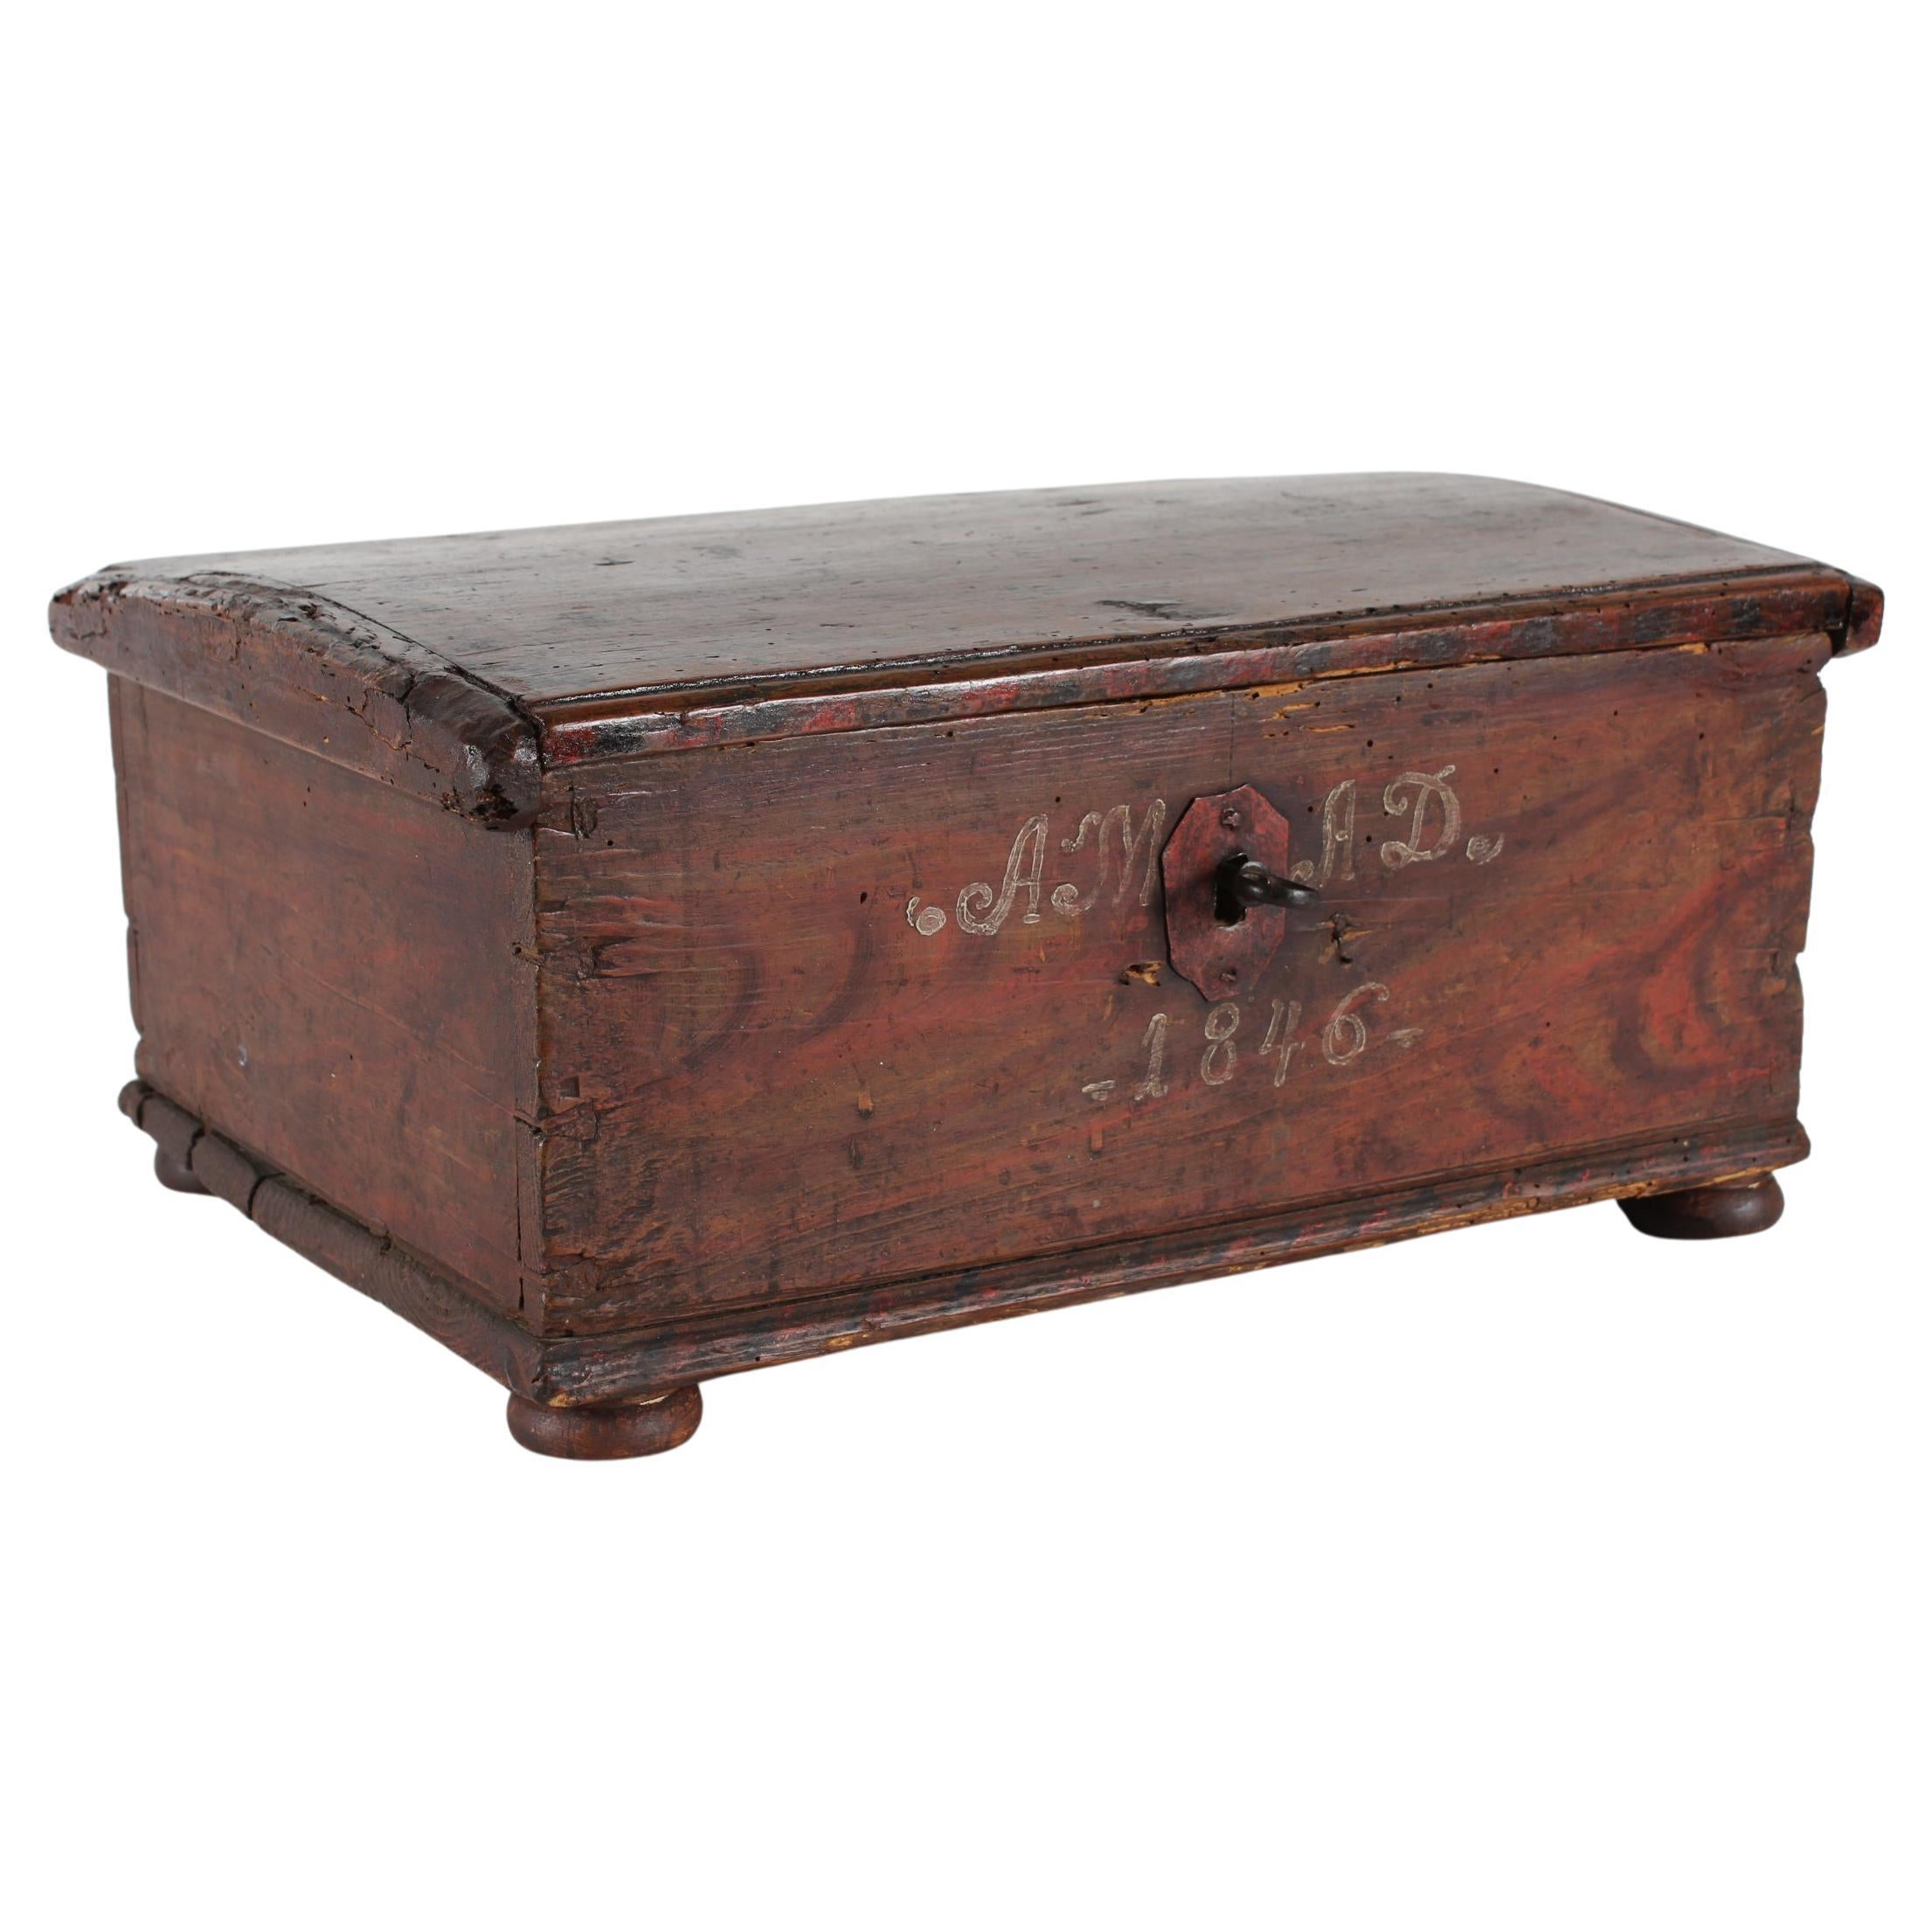 Scandinavian Antique Wooden Chest Box Shrine Handpainted, Love Gift Dated 1846 For Sale